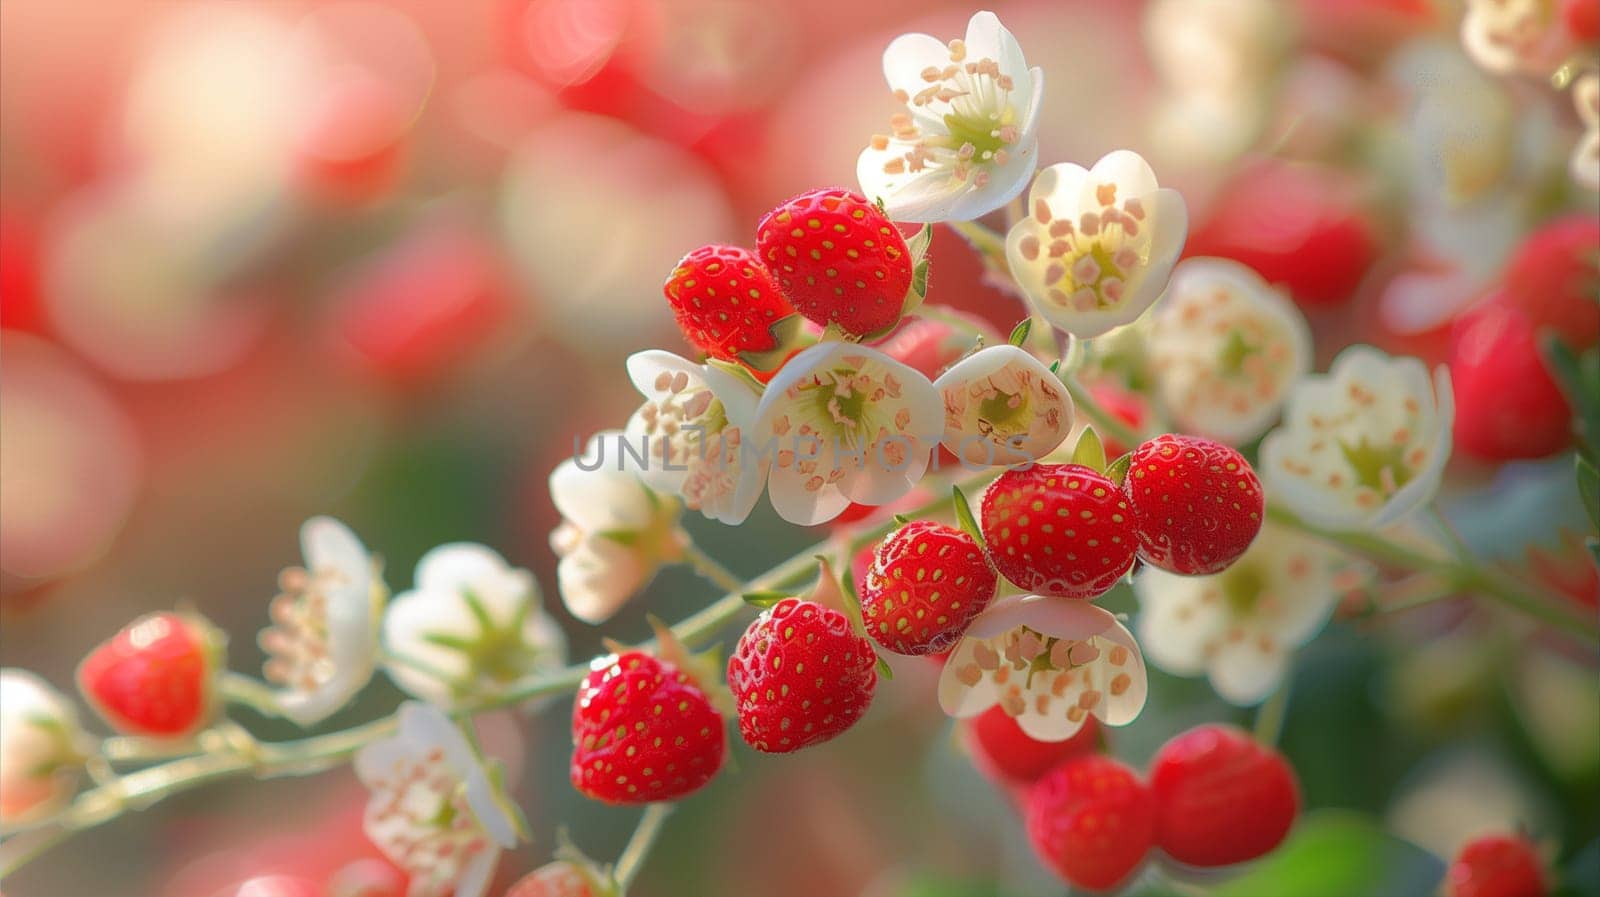 Detailed view of red and white berries, showcasing vibrant colors and textures.